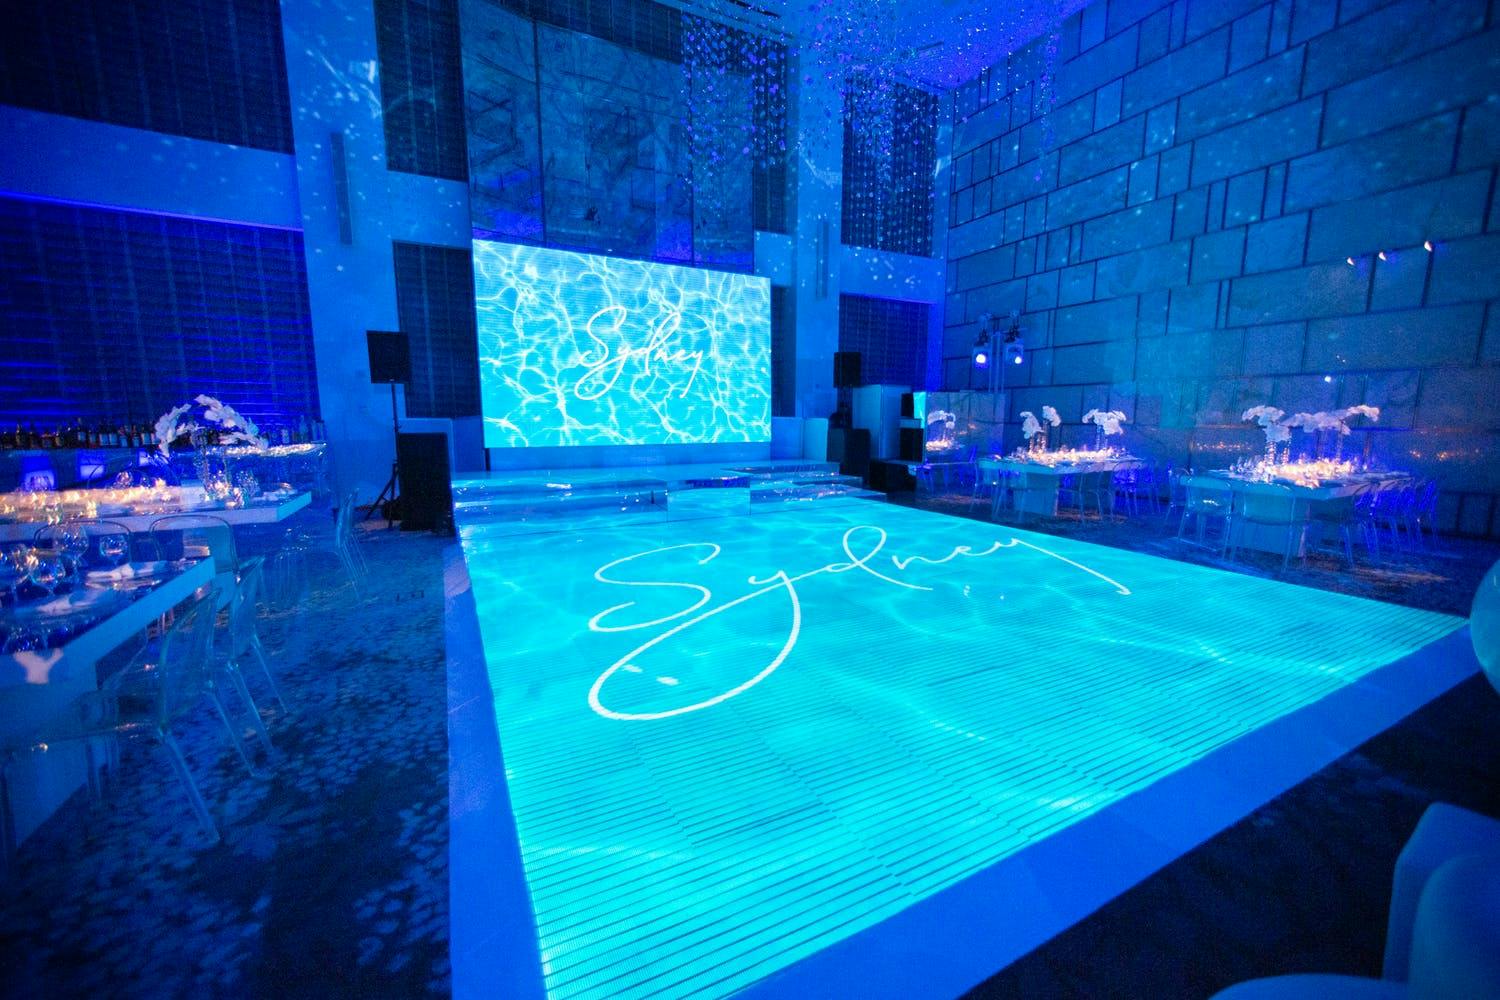 Pool Party Bat Mitzvah Theme with Blue Uplighting and LED Dance Floor | PartySlate